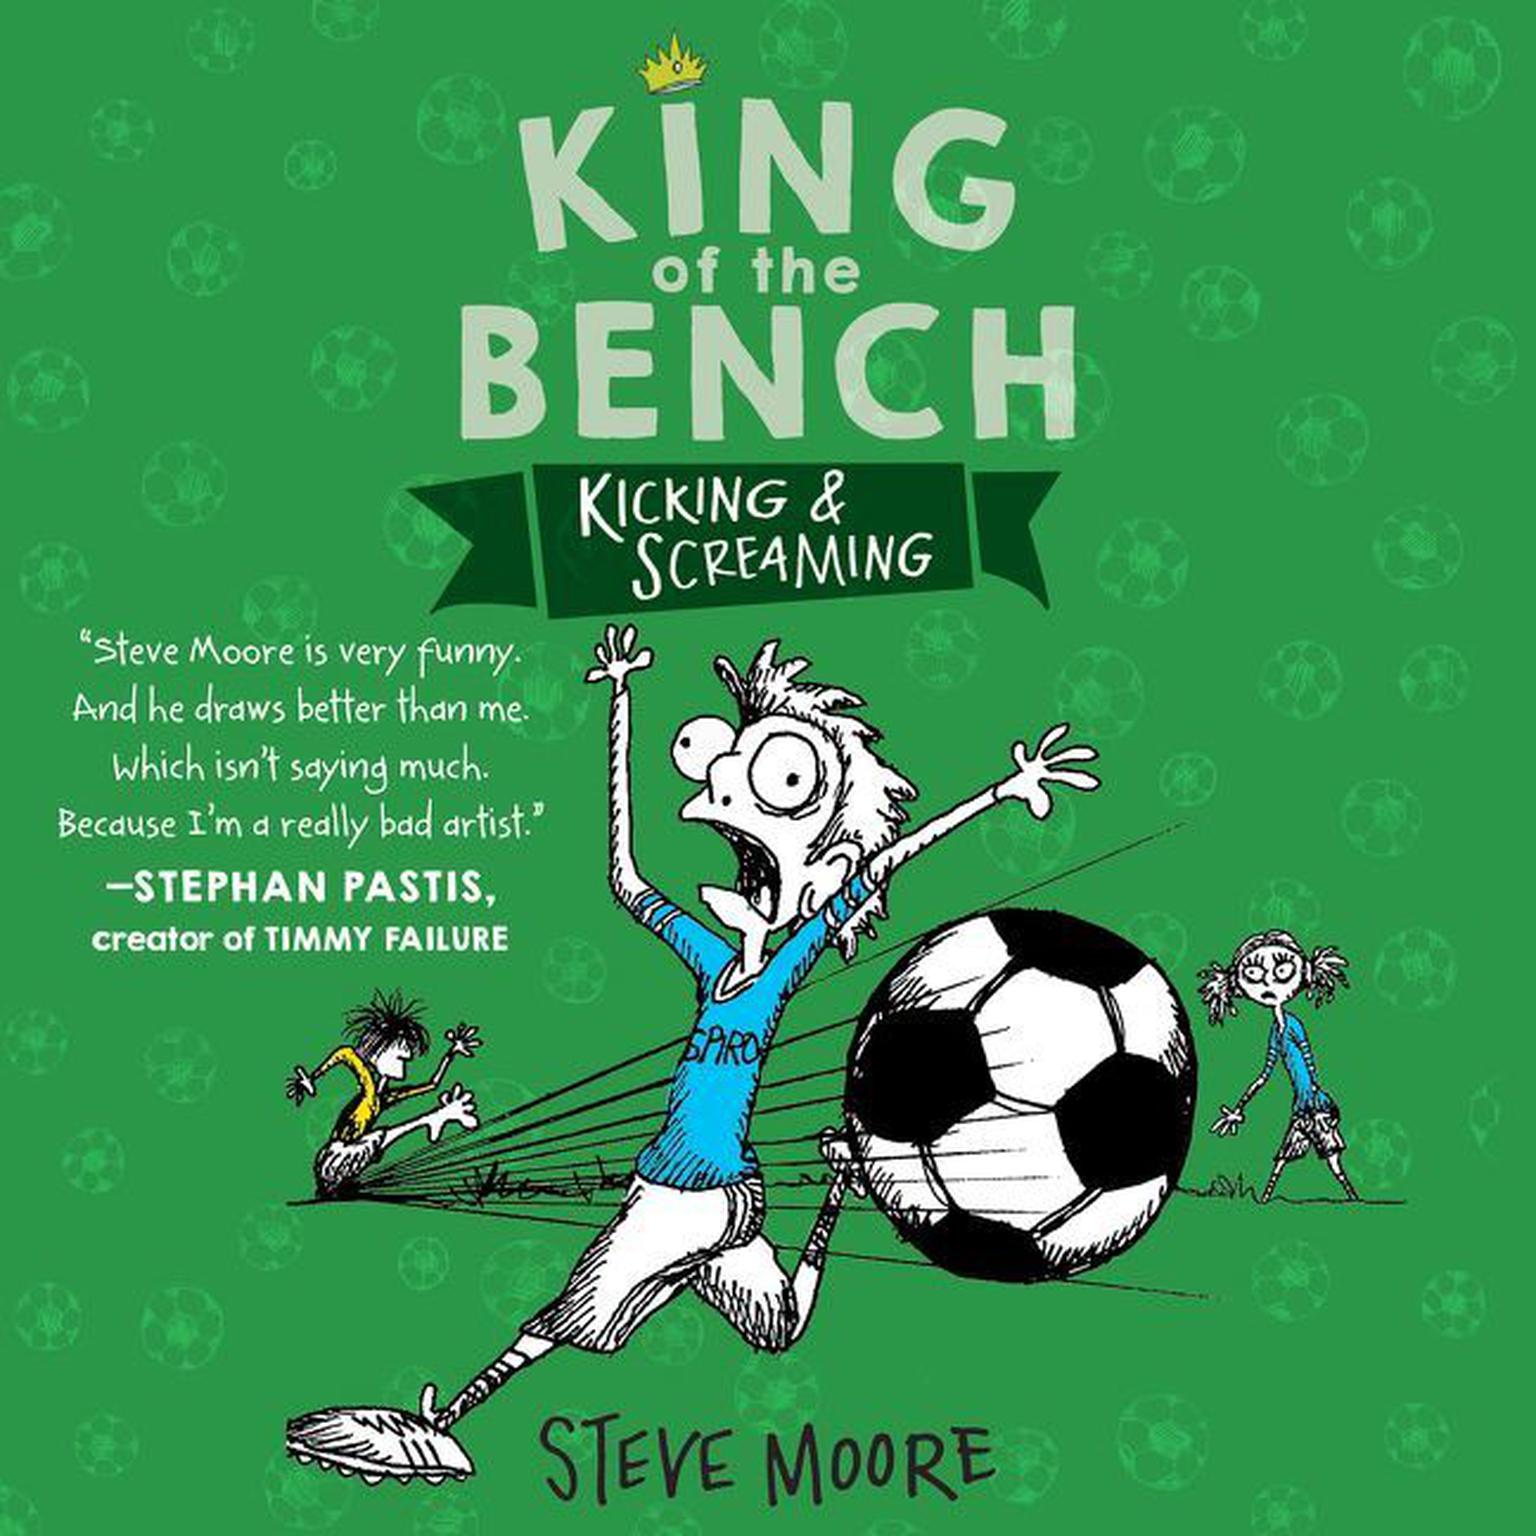 King of the Bench: Kicking & Screaming Audiobook, by Steve Moore